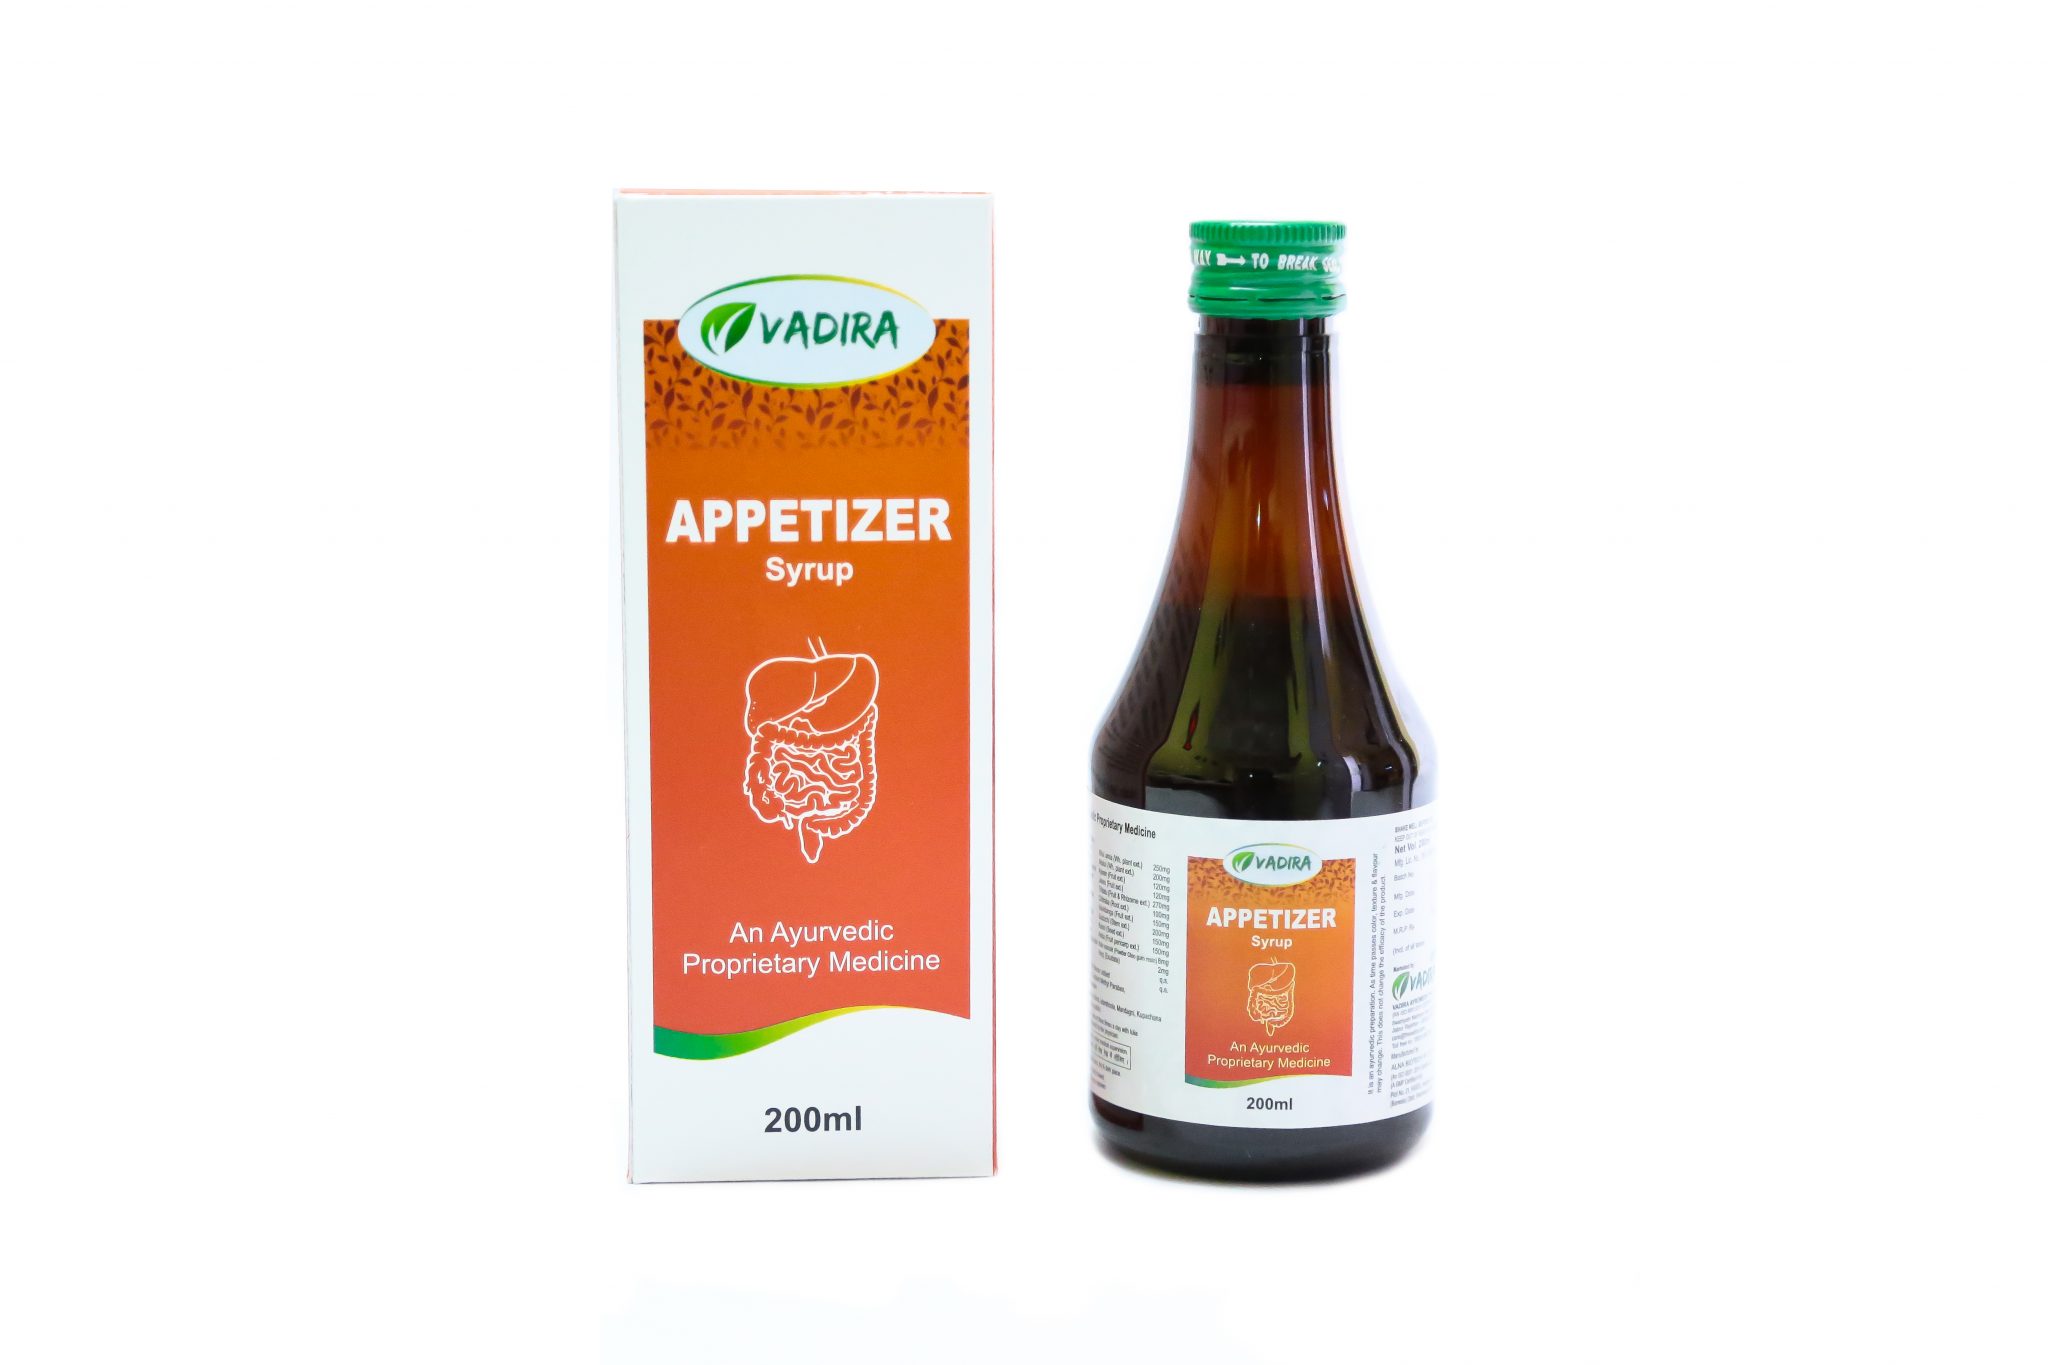 Buy Vadira Appetizer Syrup at Best Price Online